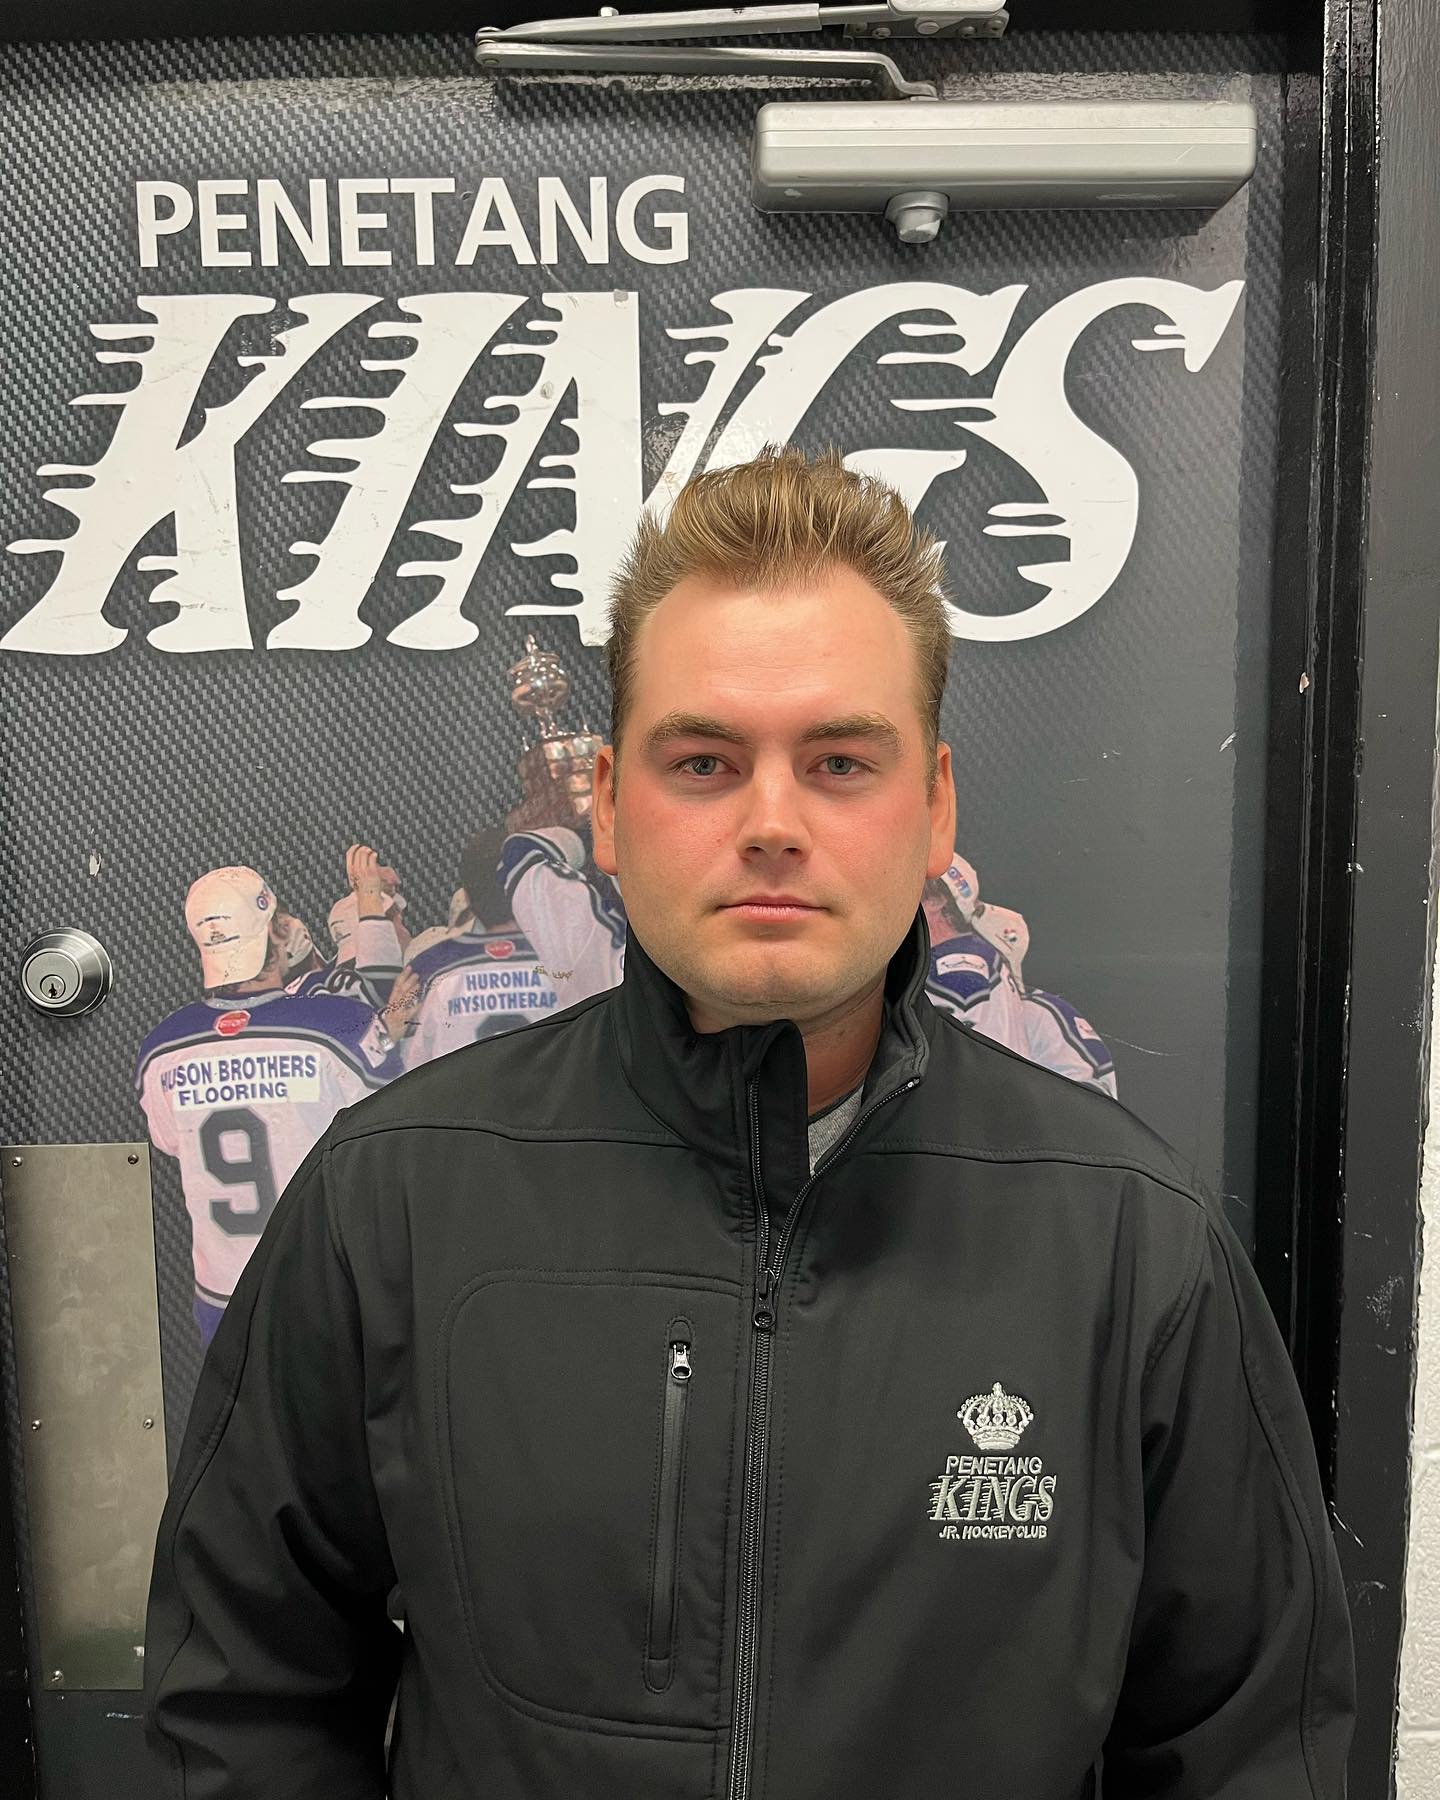 Kyle Burns joins the Coaching Staff for the 2022-23 season. 

He played in the PJHL for the Kings and also for the @JrCOtters, and has a great understanding of the game while being a great guy off the ice.

Welcome aboard Burnsy! 👑